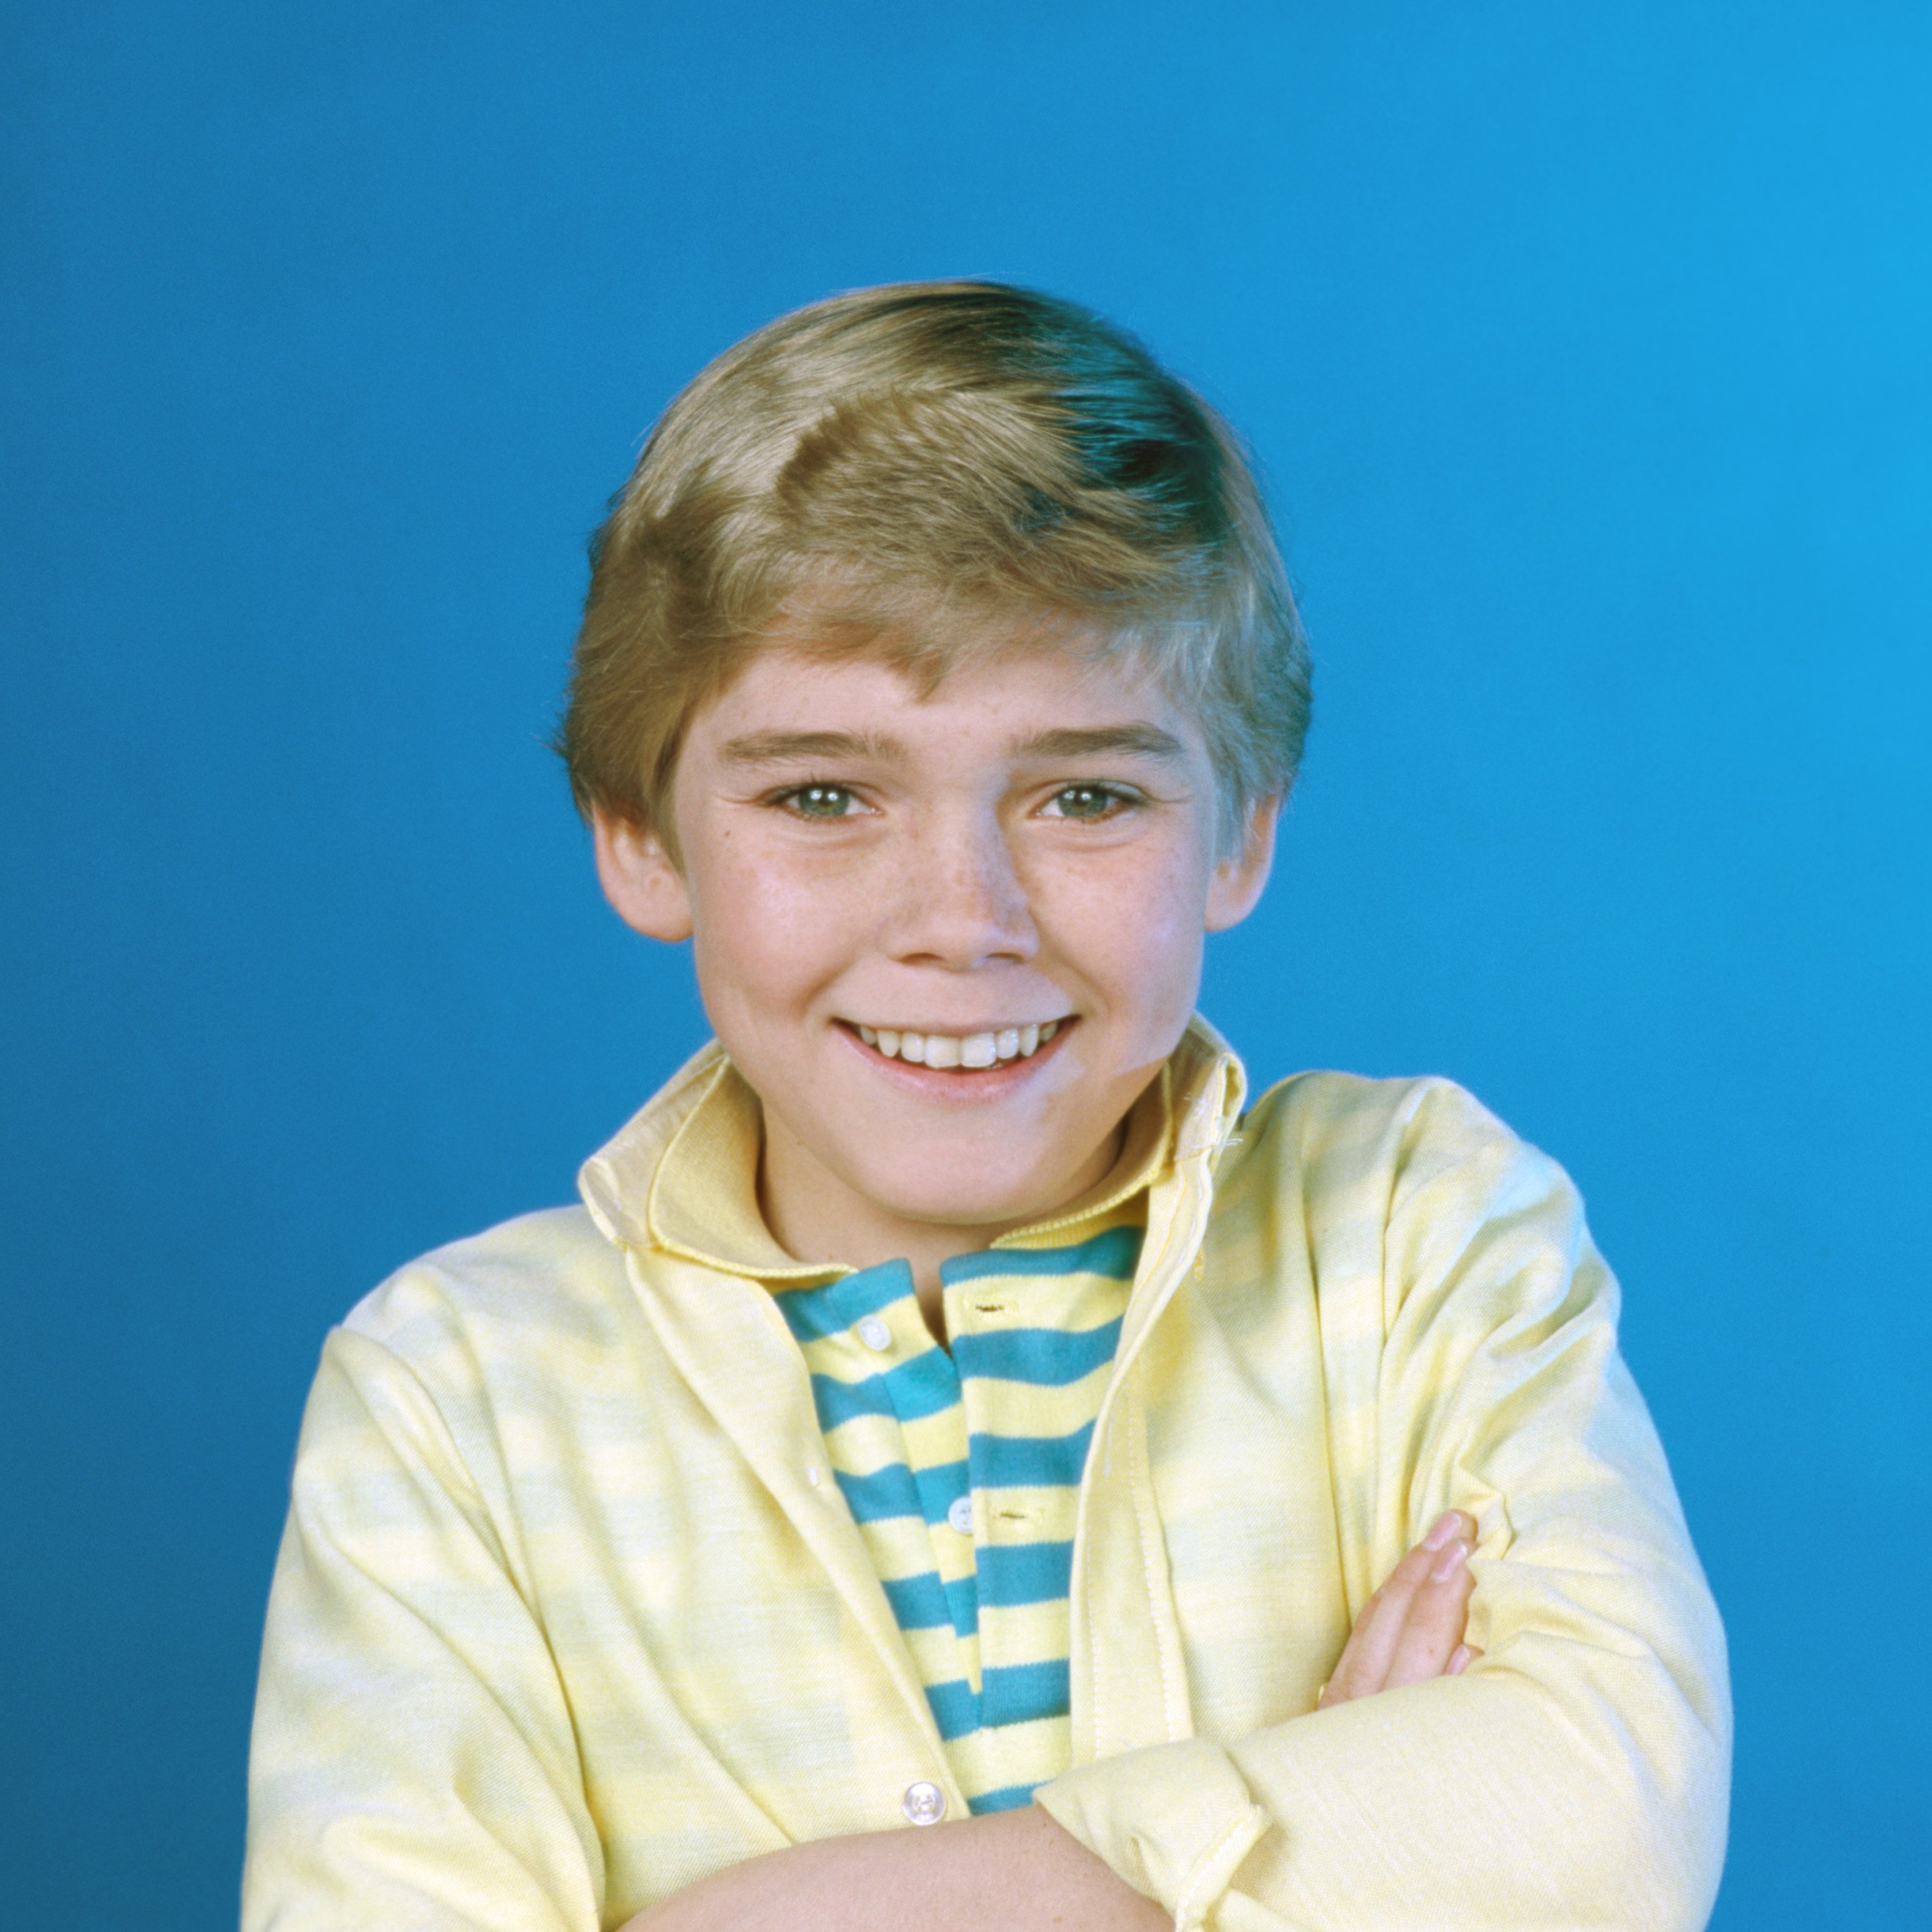 Rick Schroder in "Silver Spoons," 2006 | Source: Getty Images